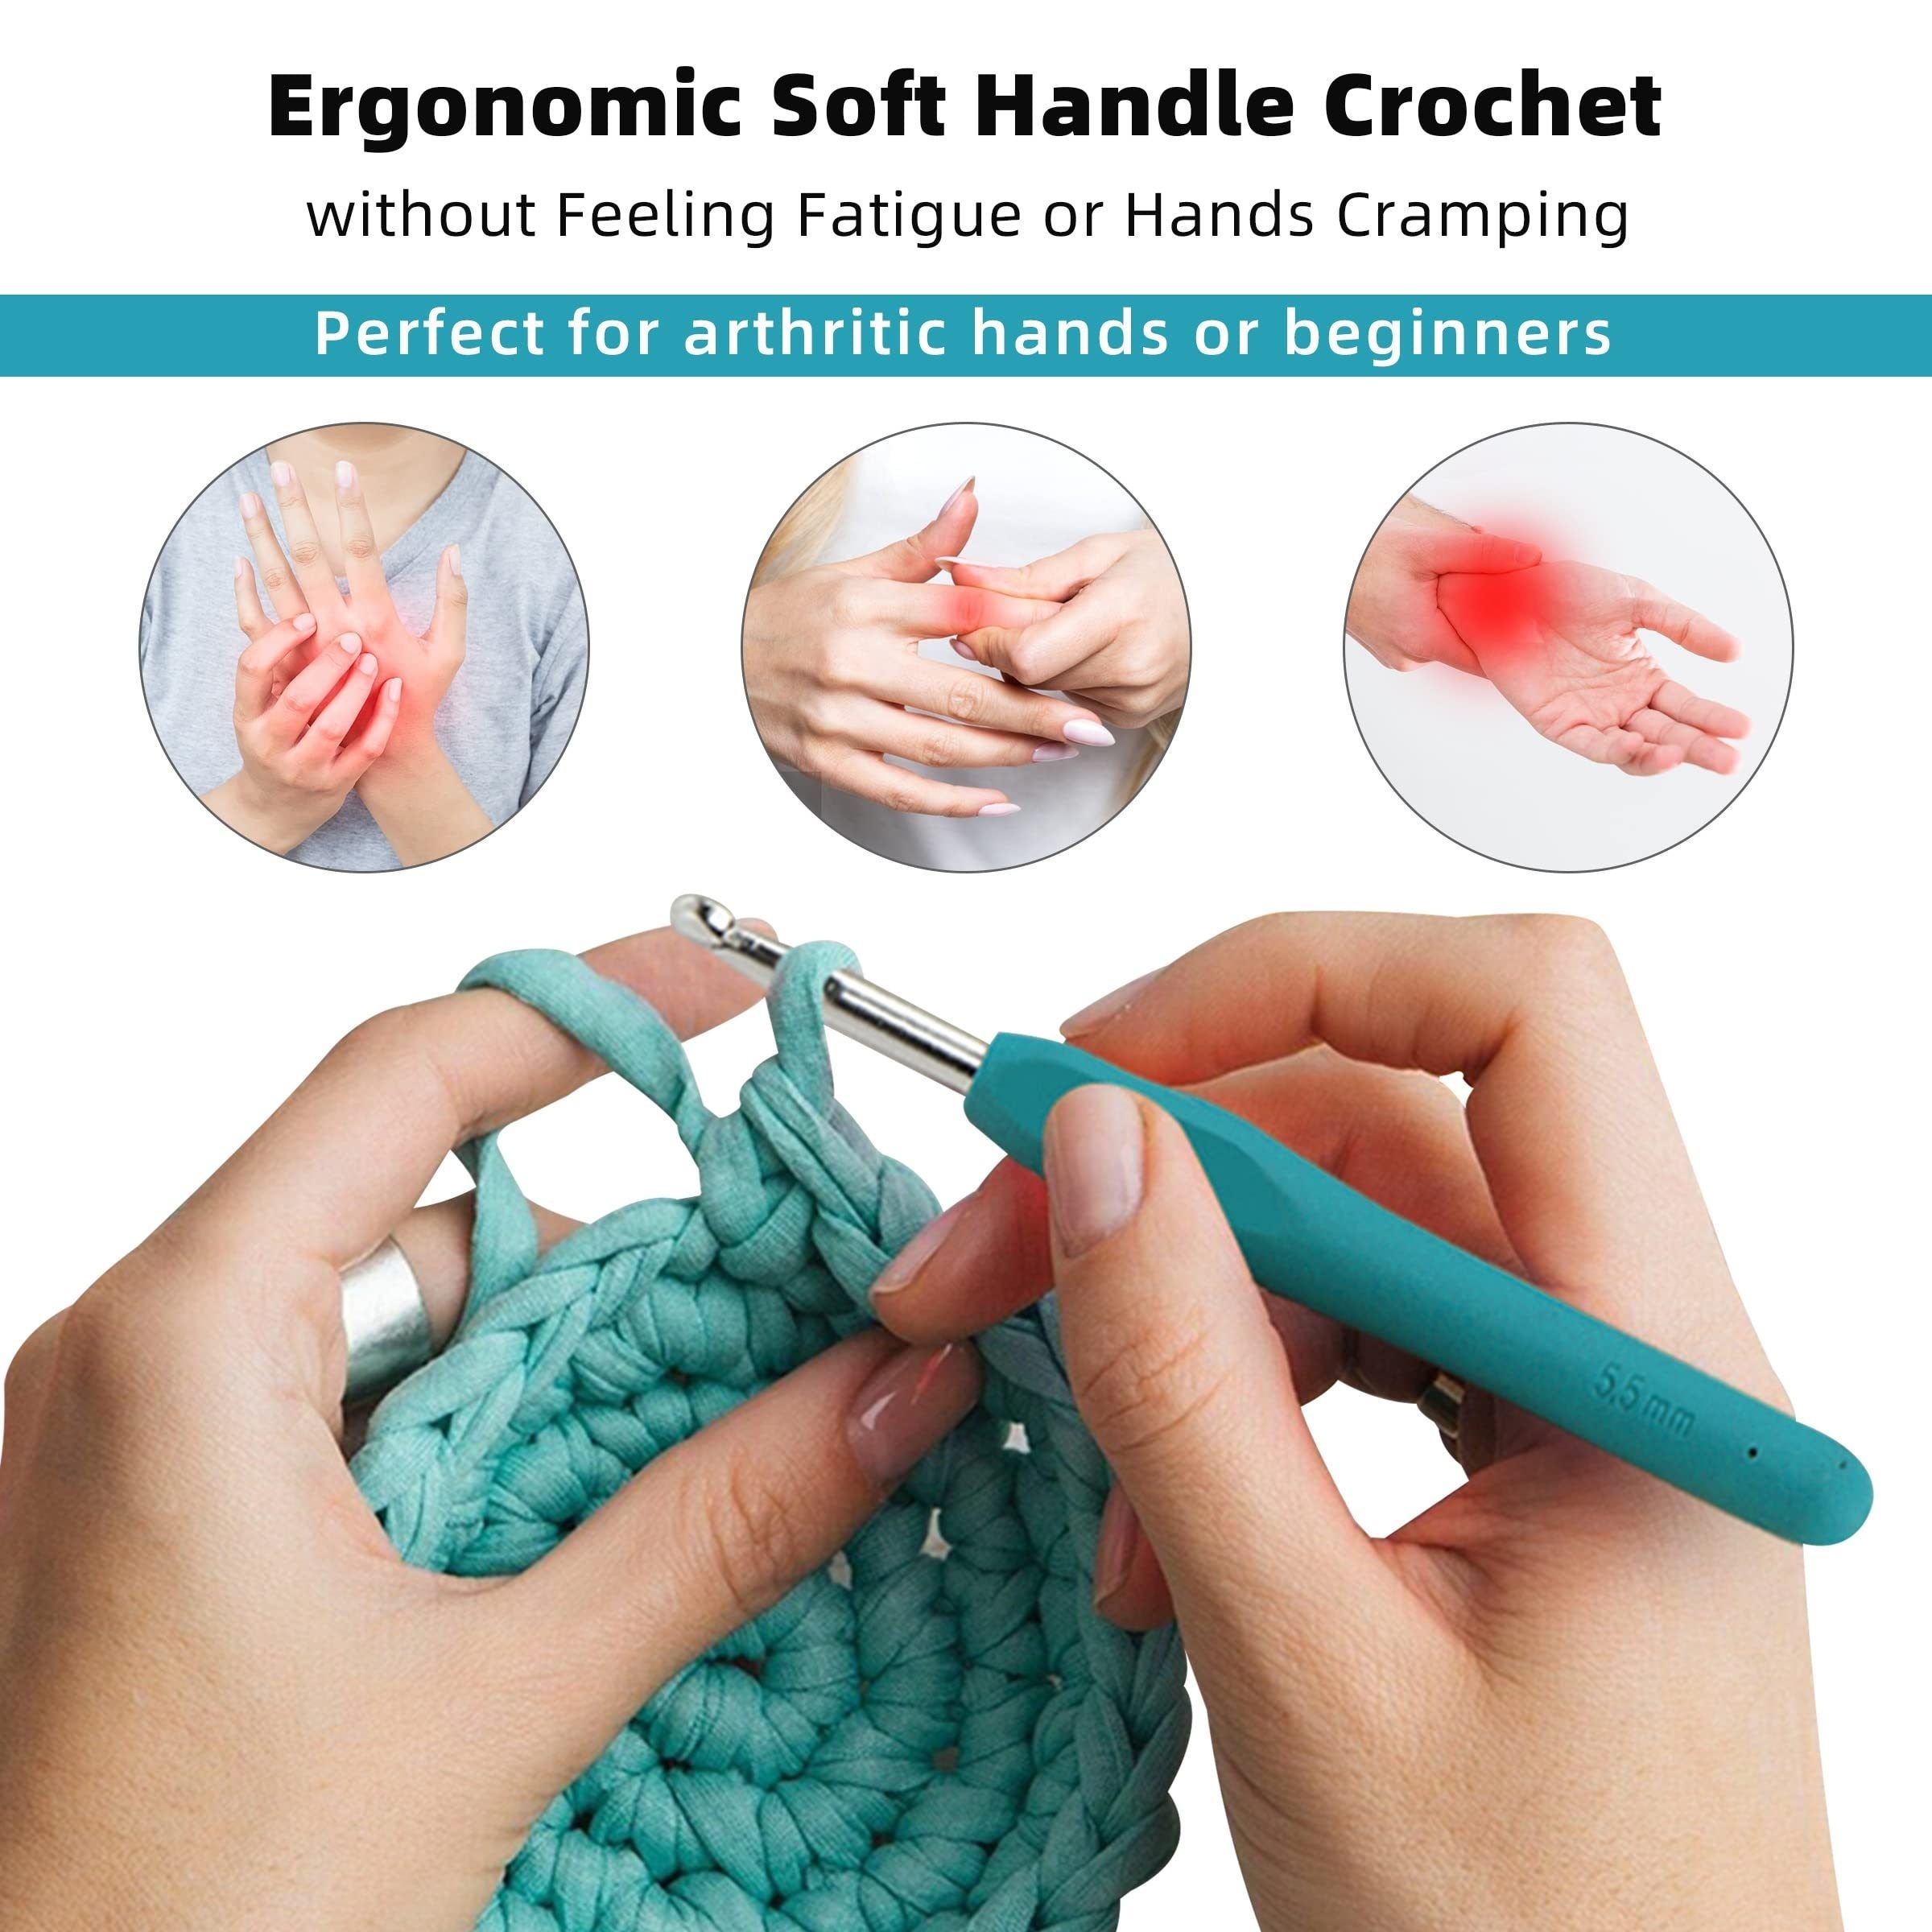 5.5mm Crochet Hook, Wooden Handle Crochet, Ergonomic Crochet with 10 Pcs  Stitch Markers for Arthritic Hand, and Beginners and Lovers DIY 